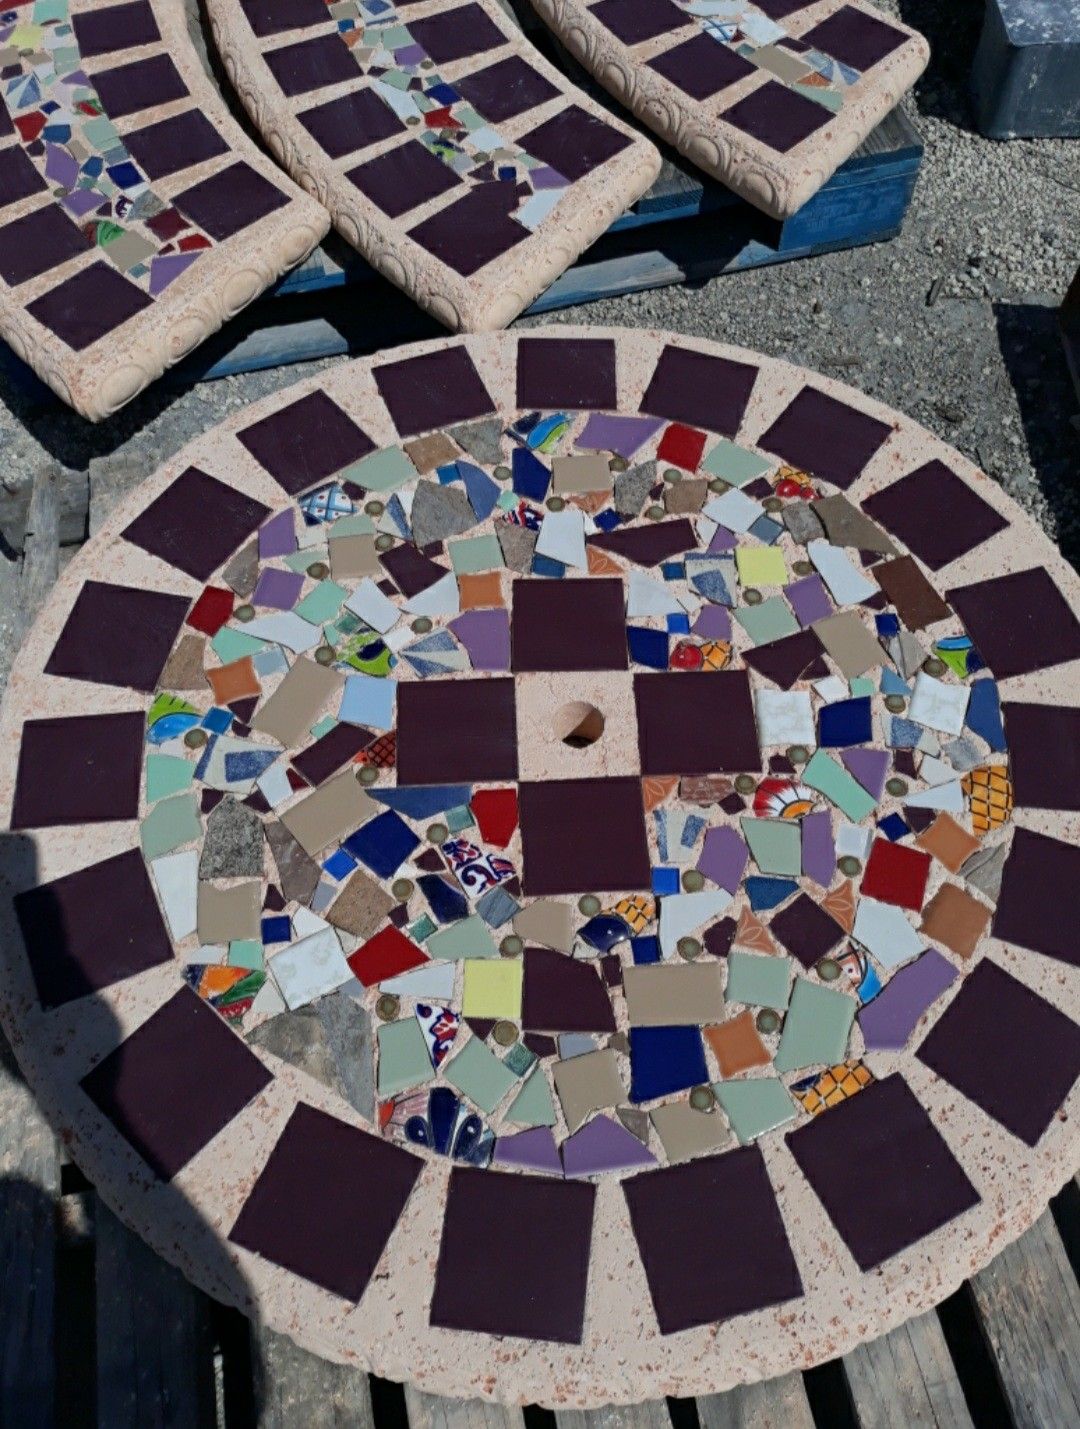 Concrete Mosaic Picnic Table with 3 Benches/ Outdoor Patio Furniture